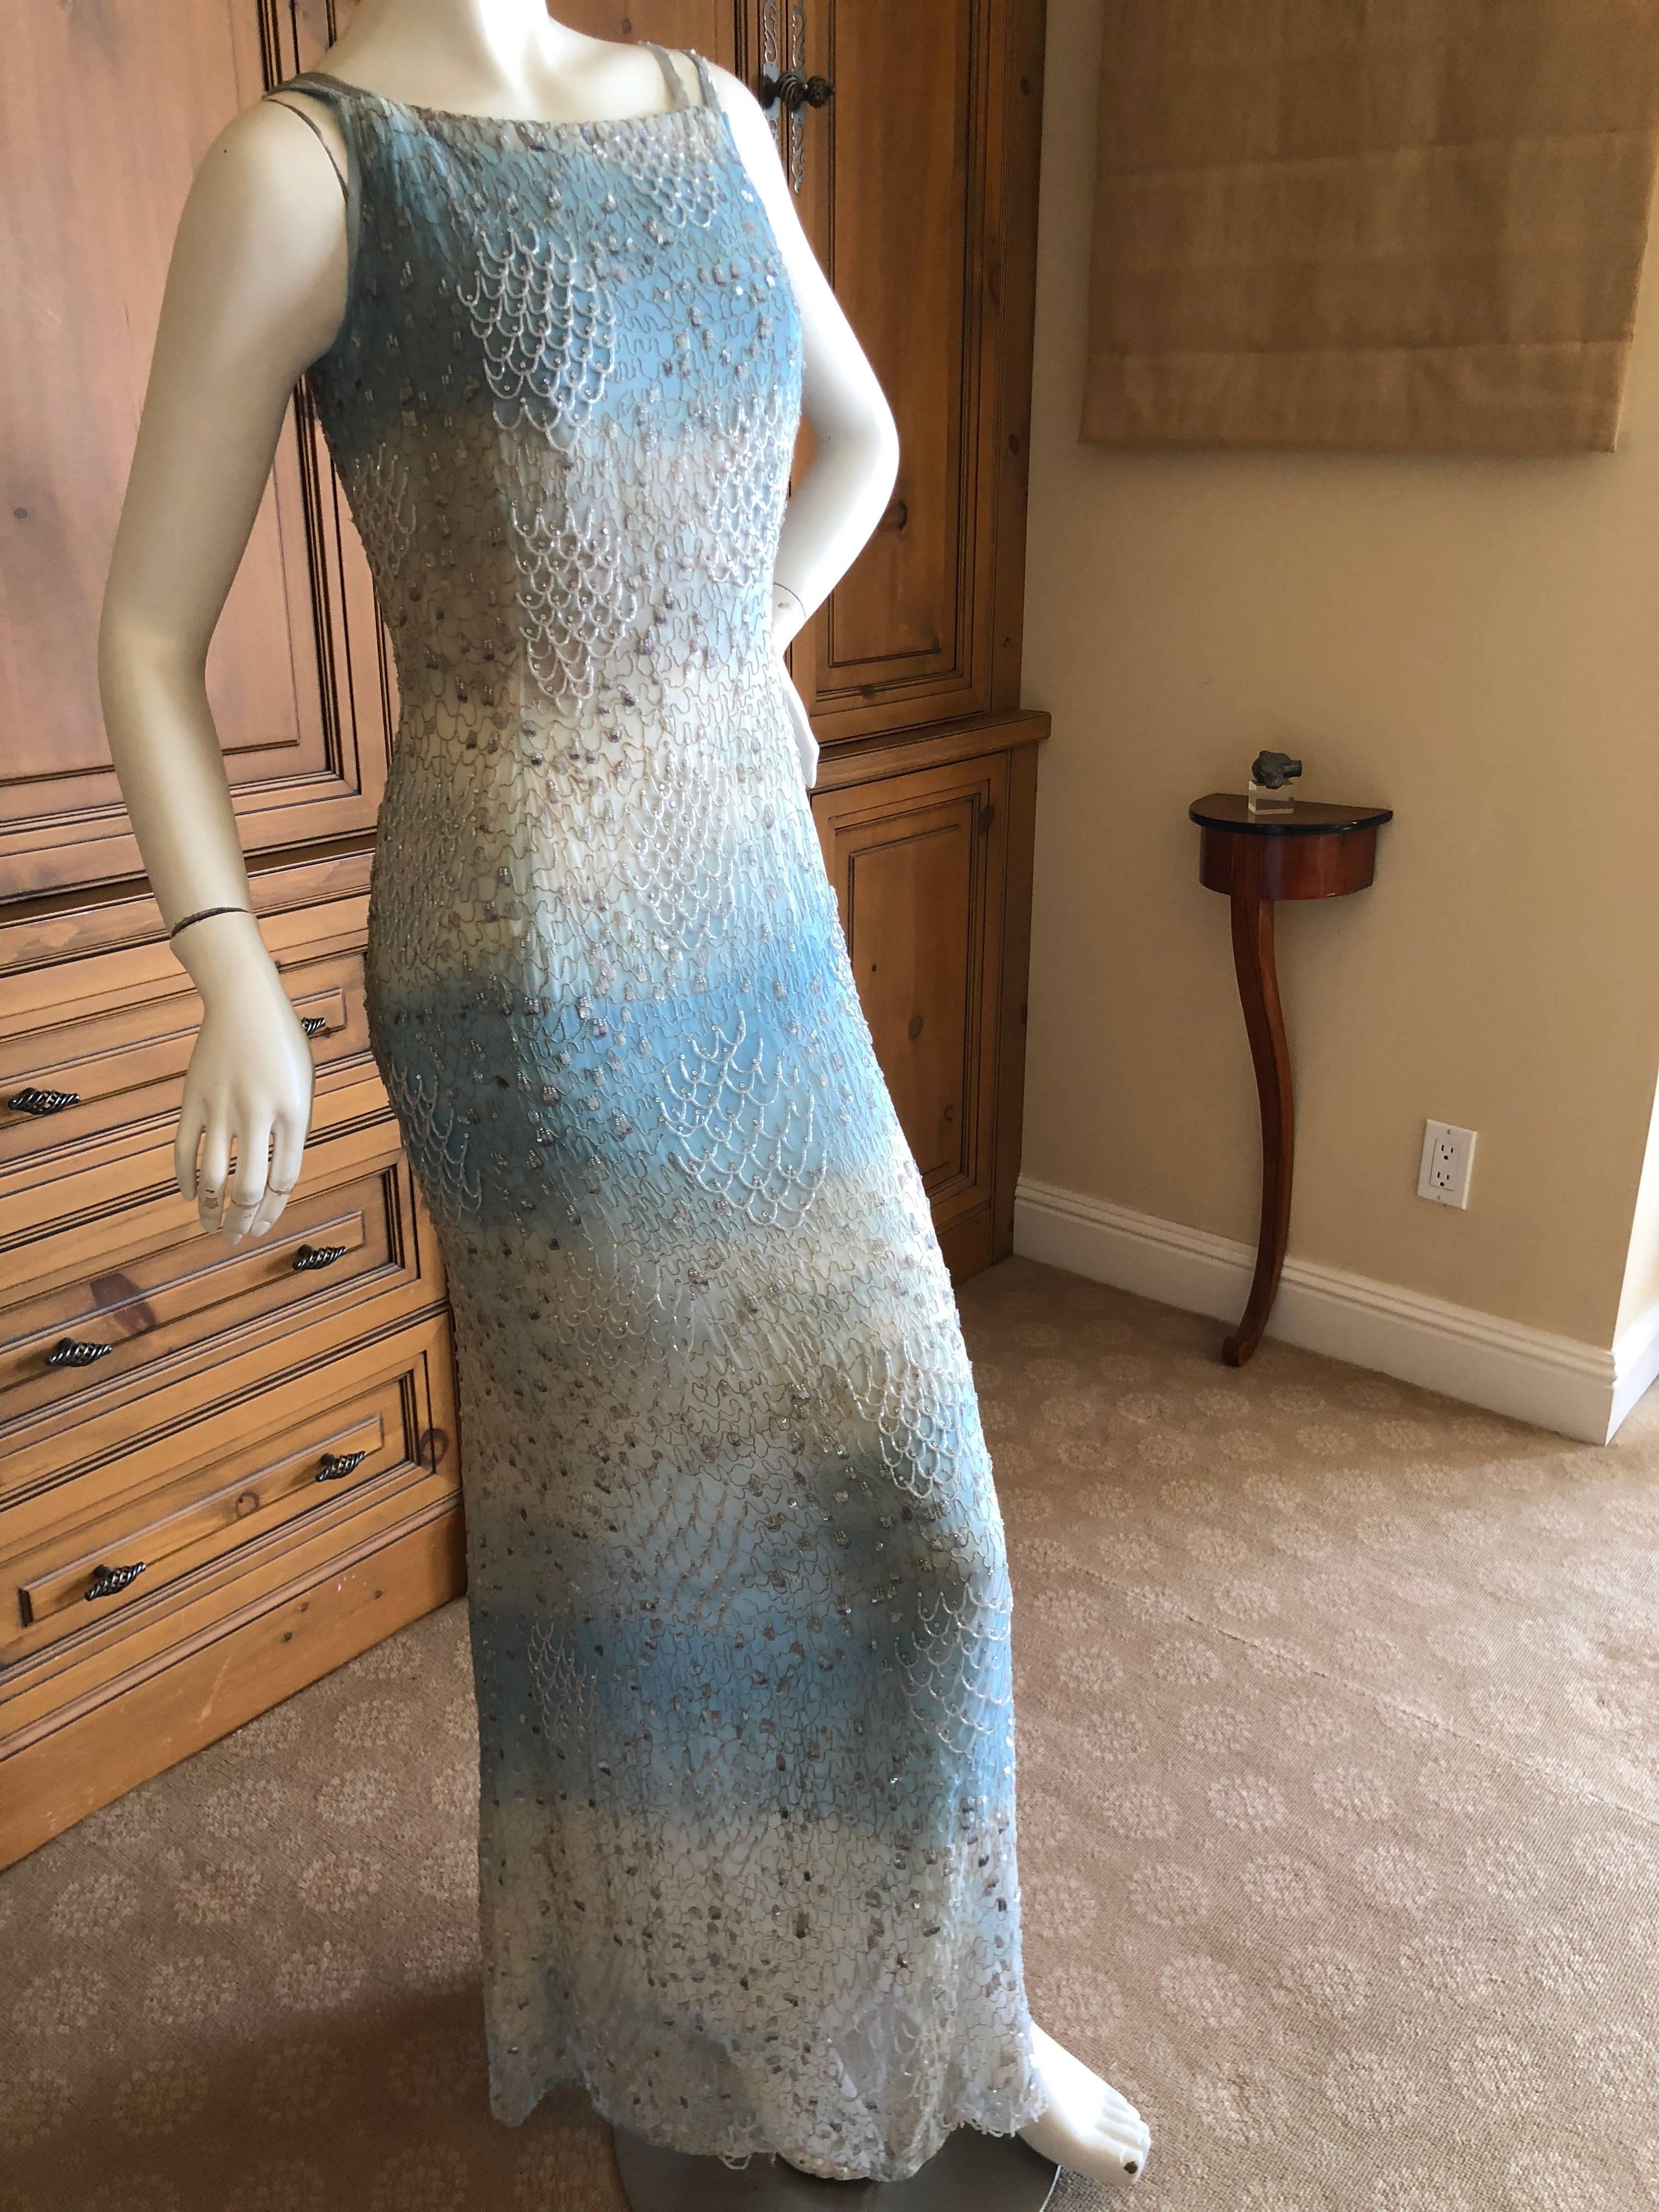 Oscar de la Renta Heavily Embellished Blue Ombre Vintage  Evening Dress 
Simply Stunning. Please use the zoom feature to see al the remarkable details.
Size 6
Bust 36